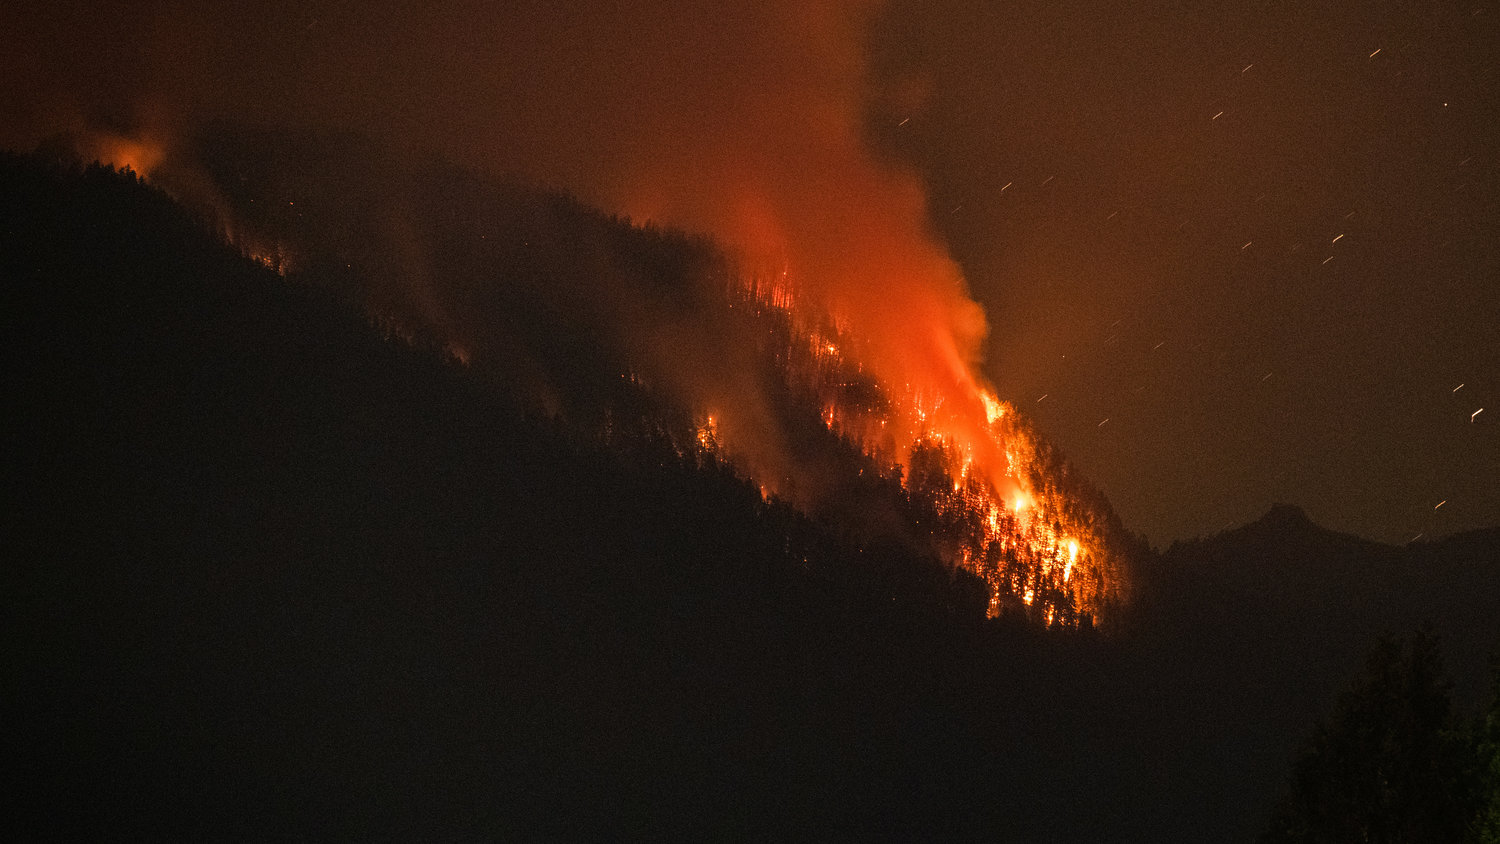 Flames from the Goat Rocks Fire ignites trees Sunday night as seen from Cannon Road in Packwood over Butler Creek.